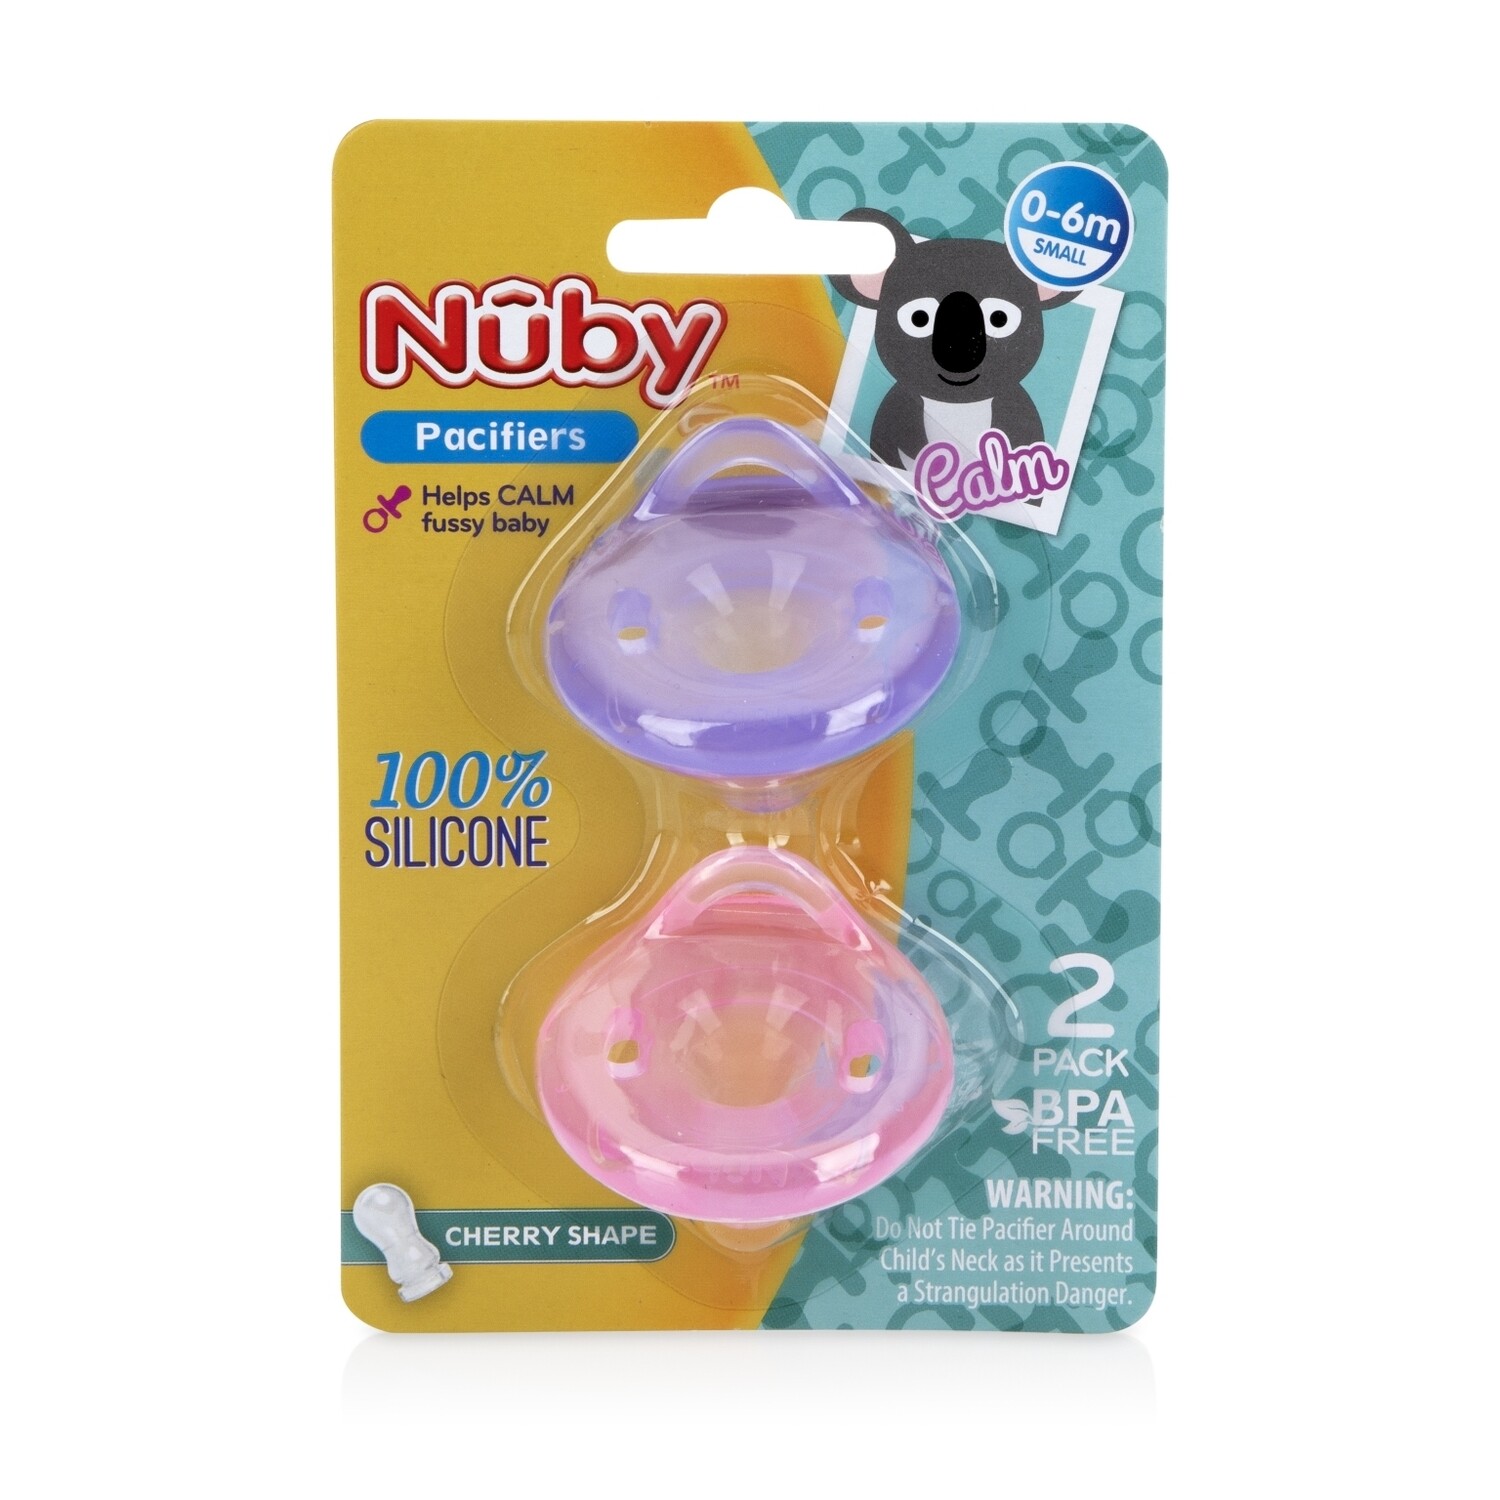 . Case of [24] Nuby 100% Silicone Pacifiers - 2 Piece, Cherry Shape .